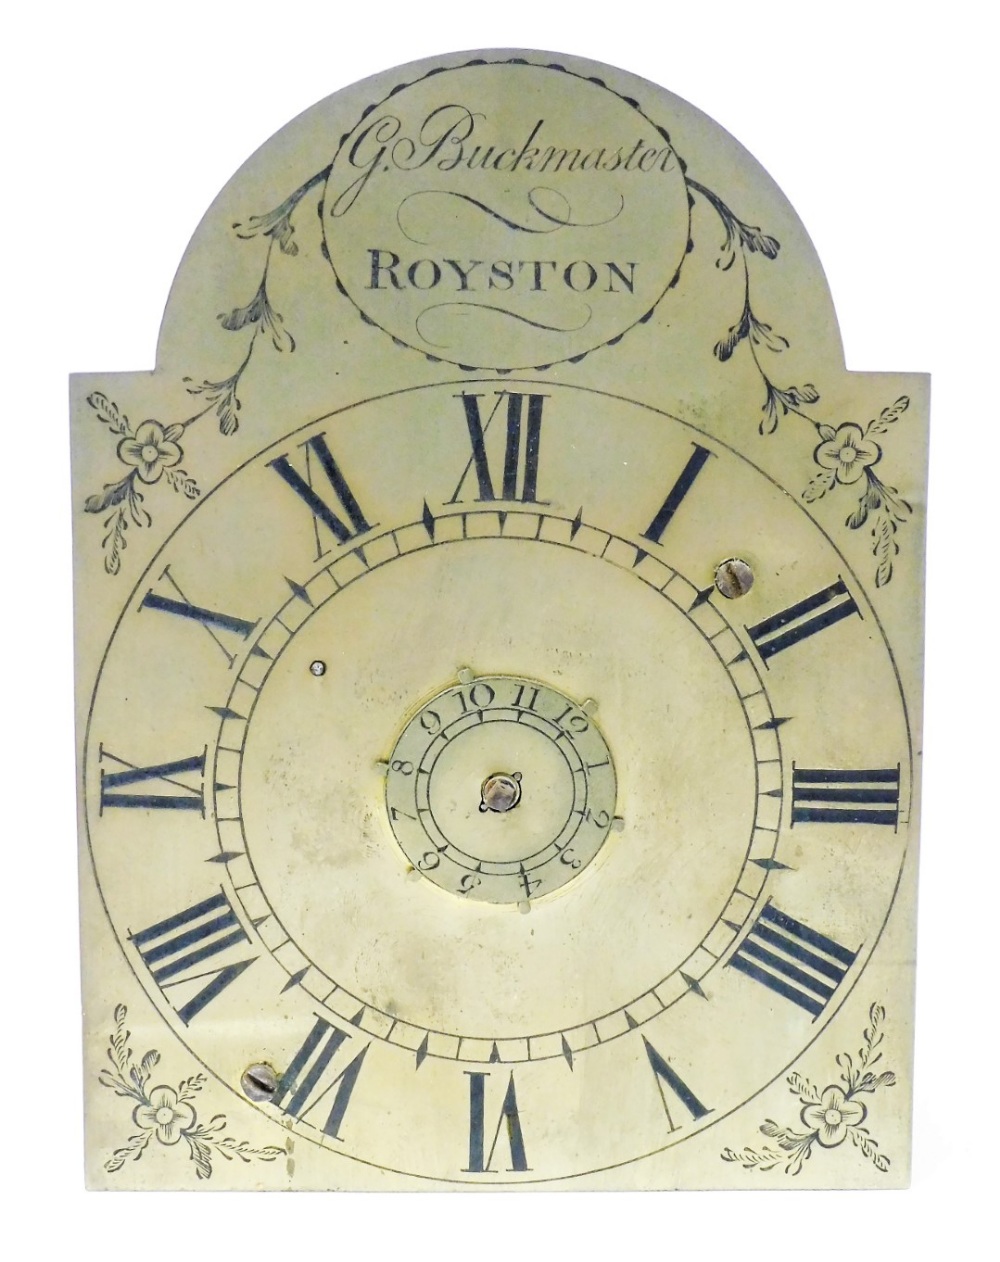 G Buckmister, Royston. An 18thC lantern clock, the brass plate front with Roman Numerals and central - Image 2 of 4